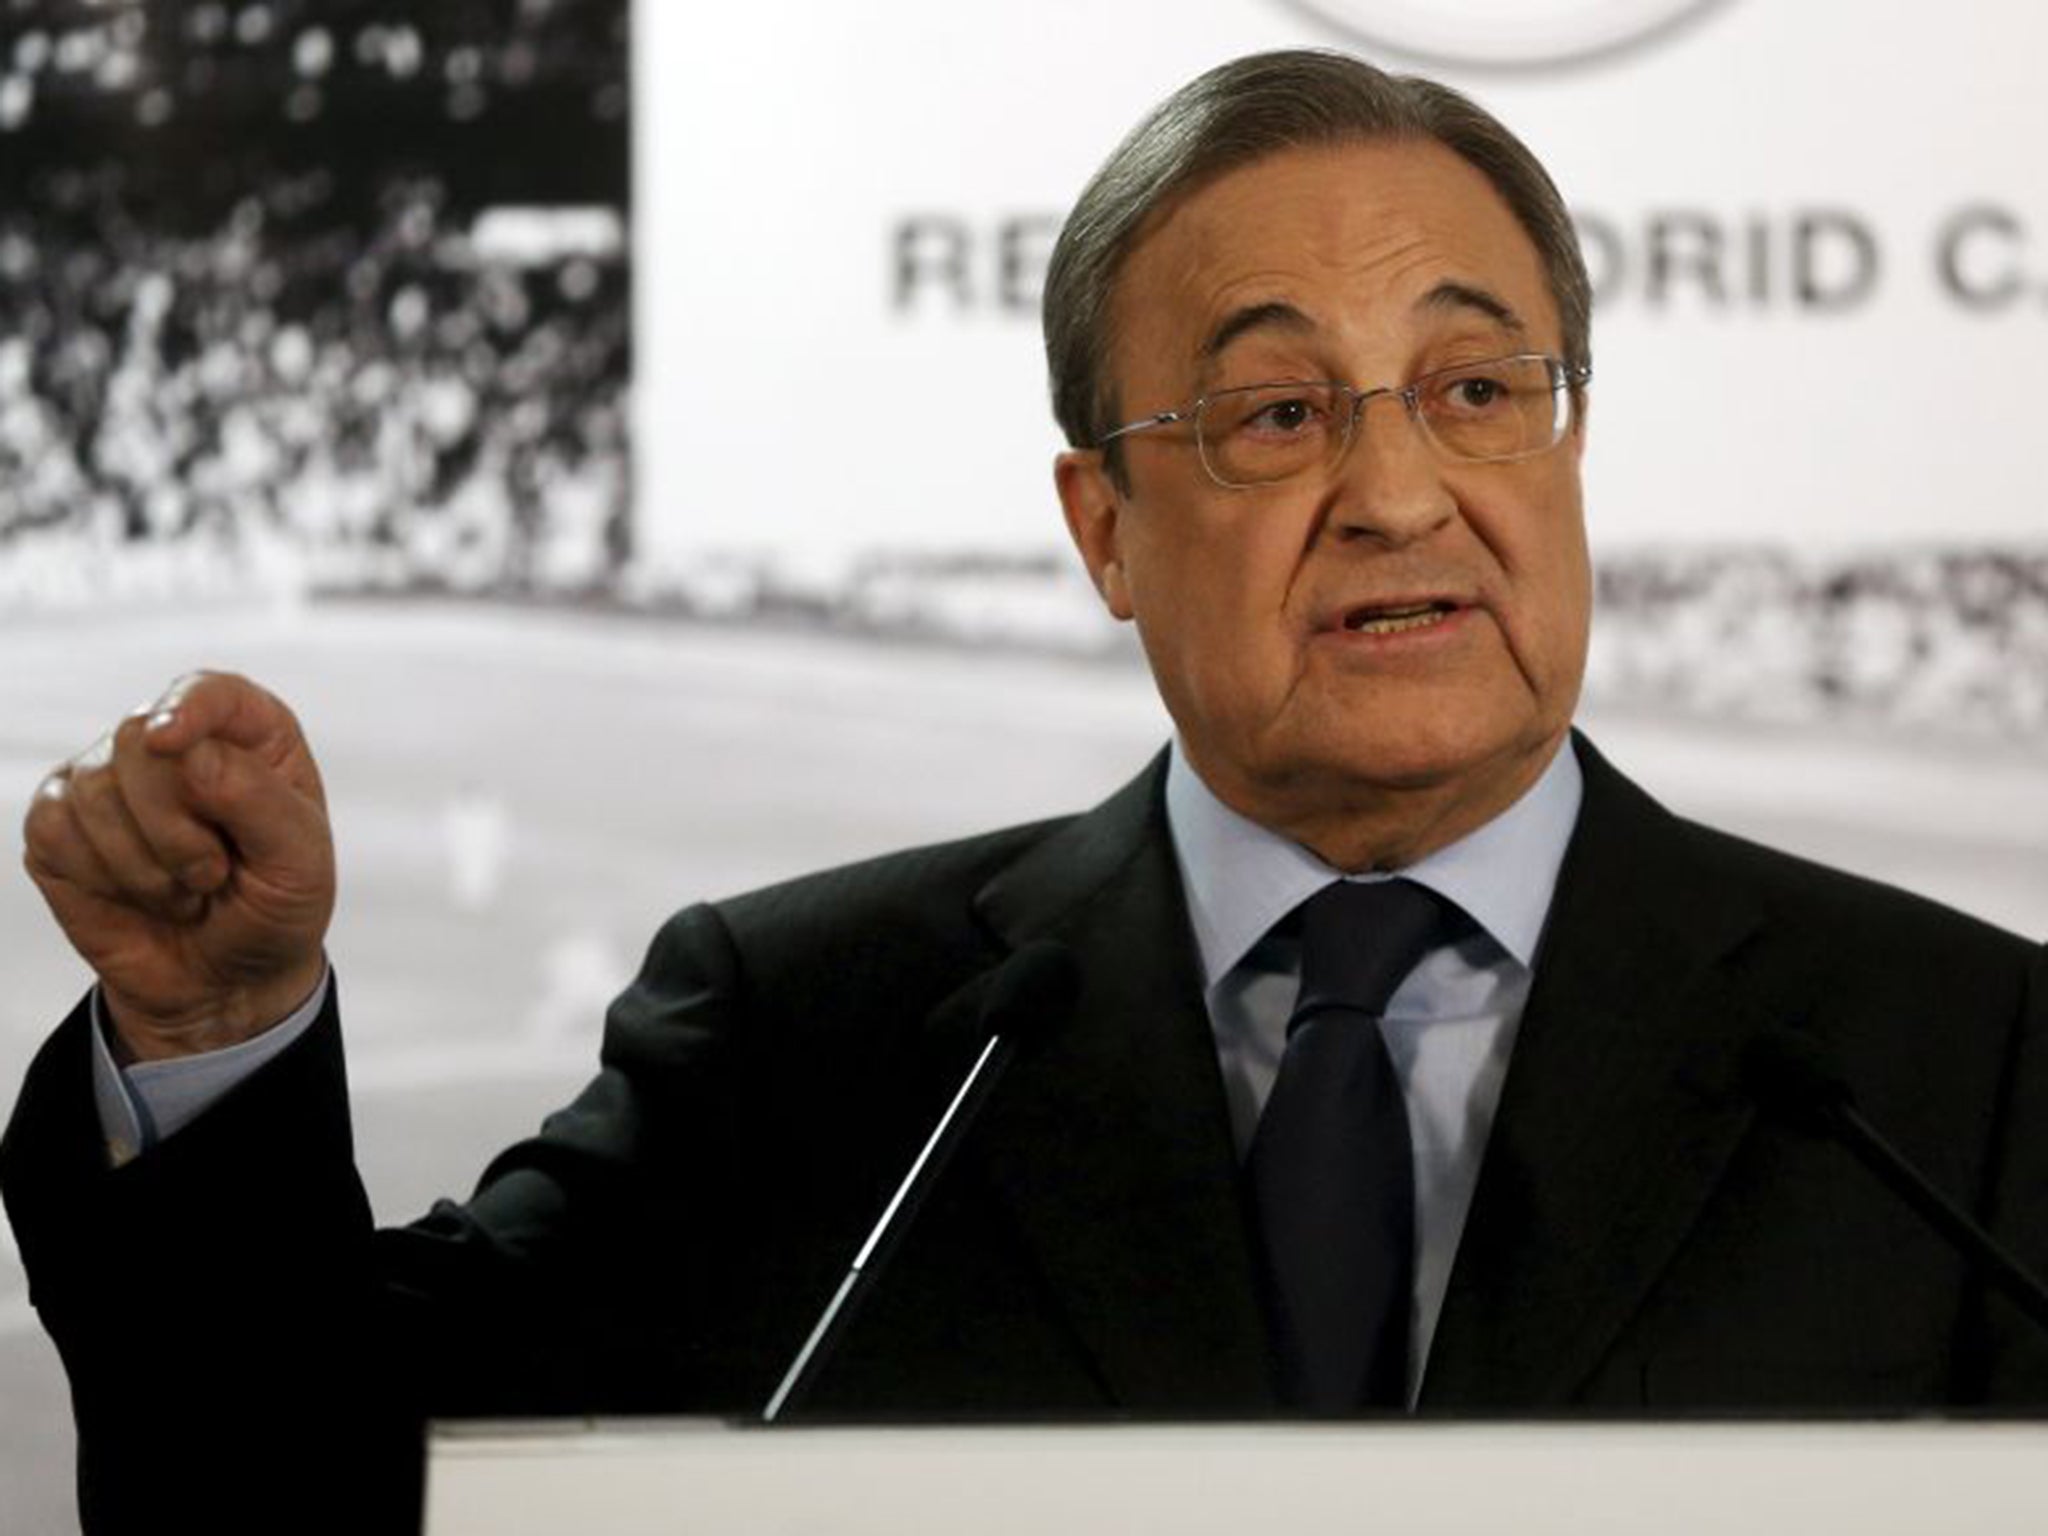 Florentino Perez claimed Real Madrid’s decline started in January